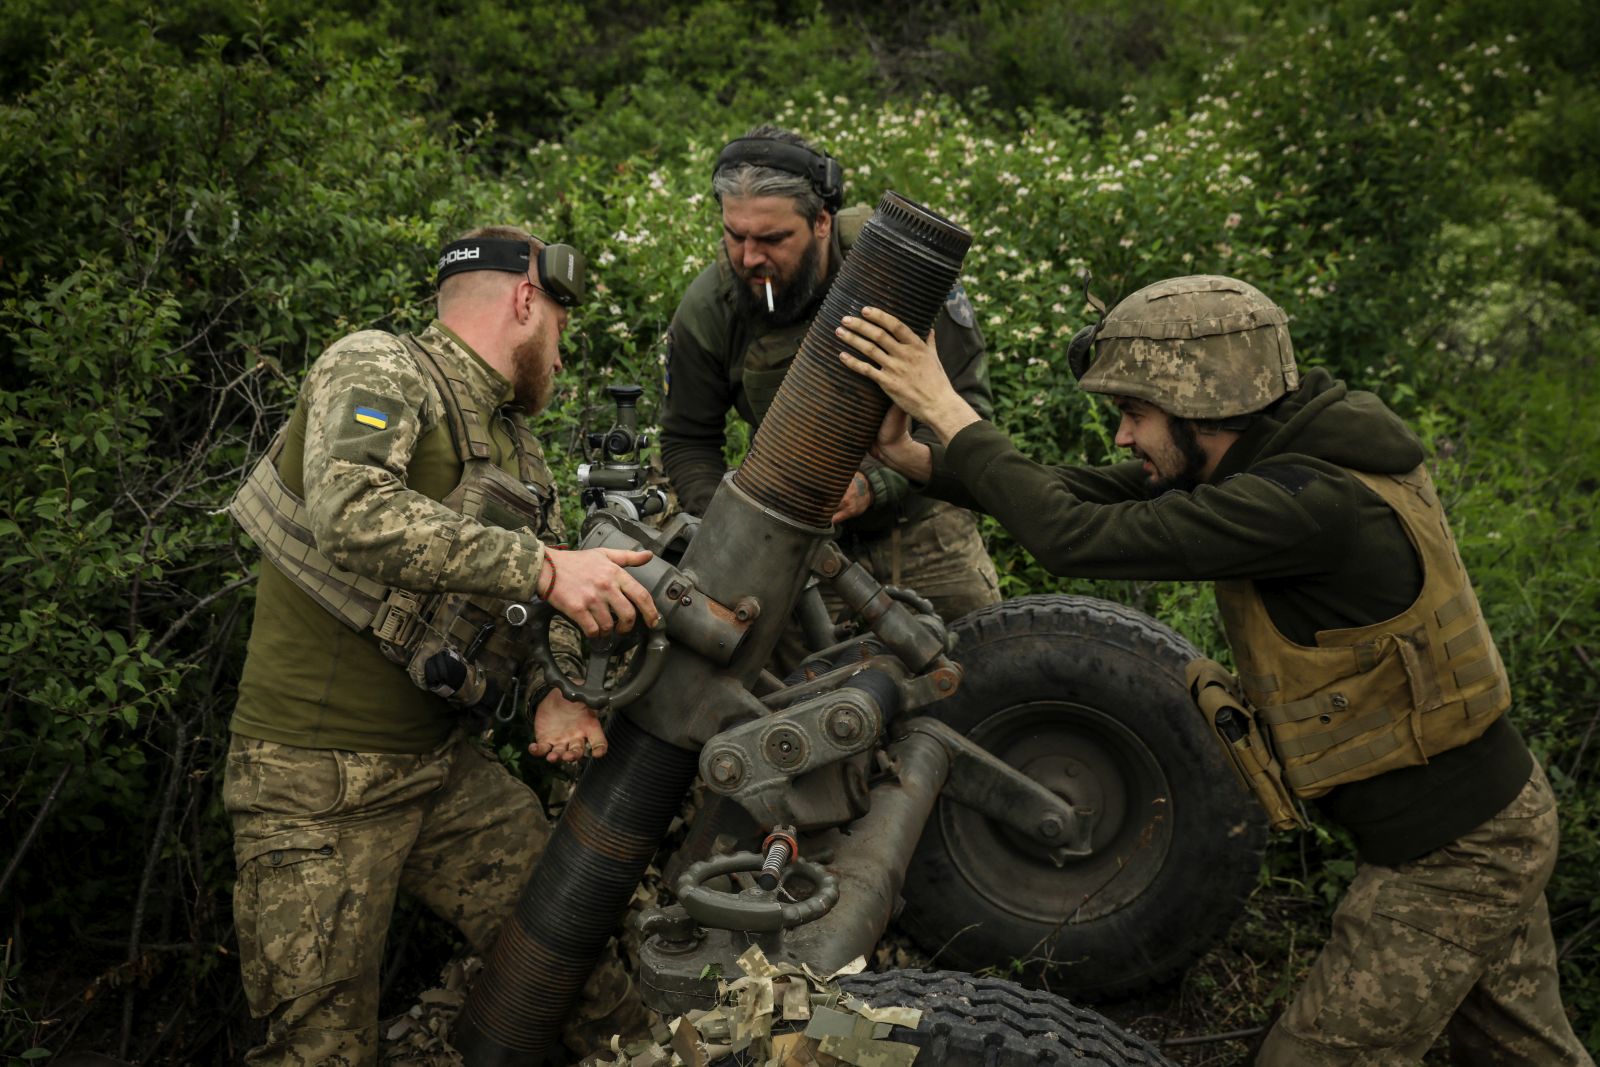 epa10648091 Members of the 10th Separate Mountain Assault Brigade 'Edelweiss', a unit of the Ukrainian Ground Forces, prepare their mortar before firing at an undisclosed location in the Bakhmut direction, Donetsk region, eastern Ukraine, 23 May 2023, amid the Russian invasion. The frontline city of Bakhmut, a key target for Russian forces, has seen heavy fighting for months. Russian troops on 24 February 2022, entered Ukrainian territory, starting a conflict that has provoked destruction and a humanitarian crisis.  EPA/OLEG PETRASYUK